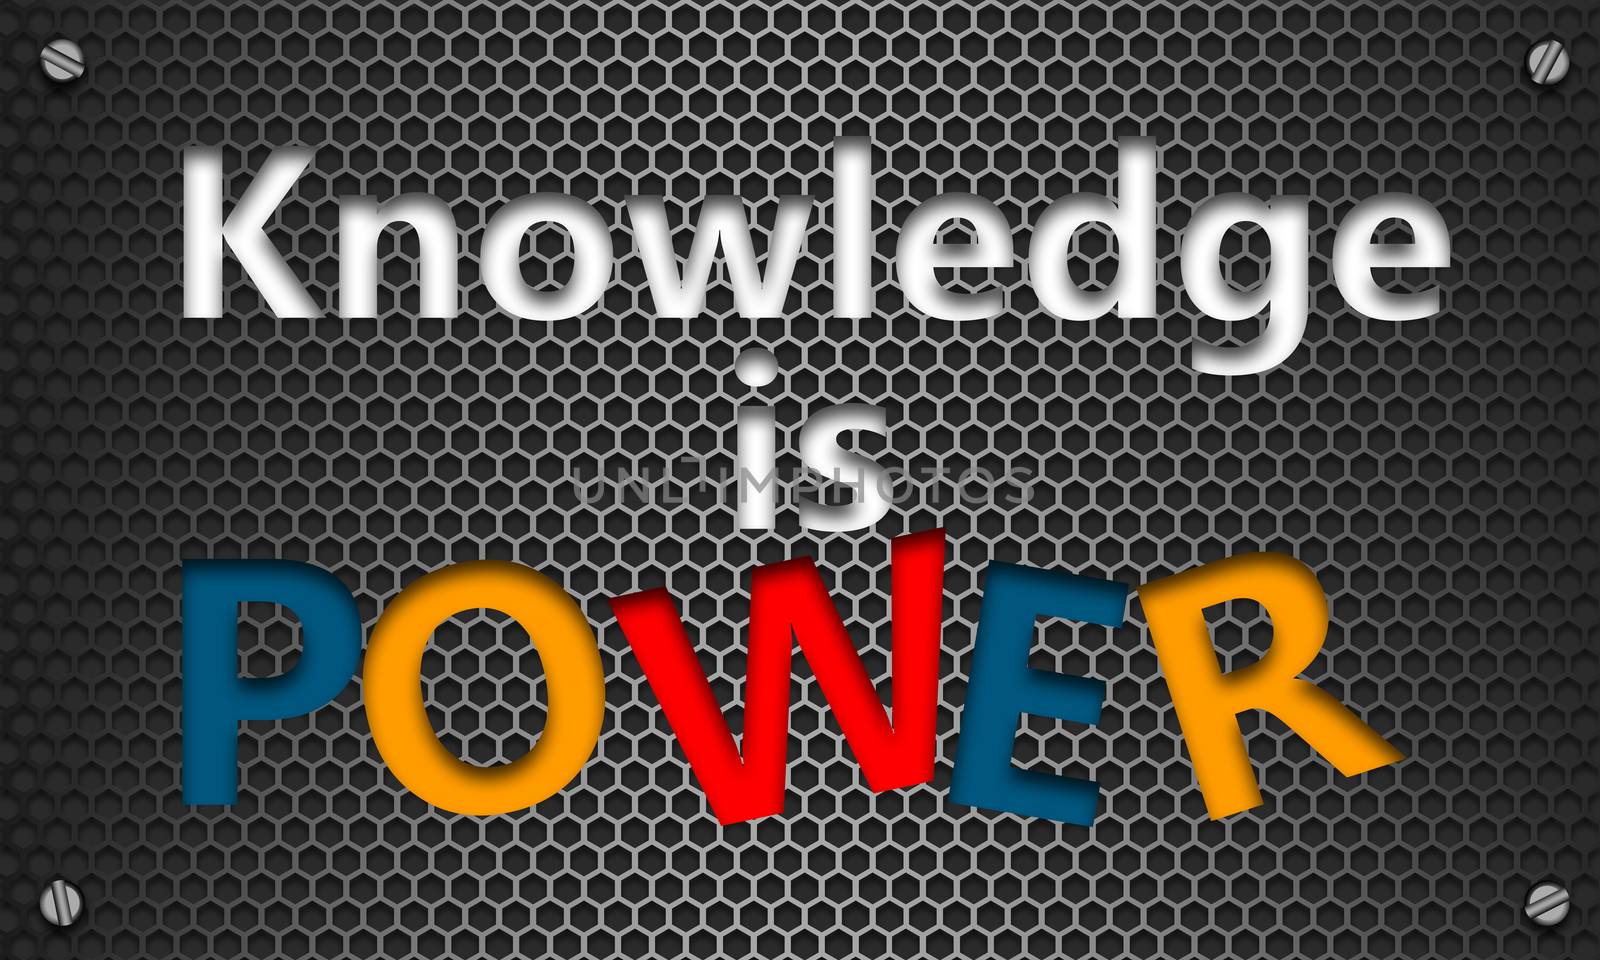 Knowledge is power concept on mesh hexagon background by tang90246